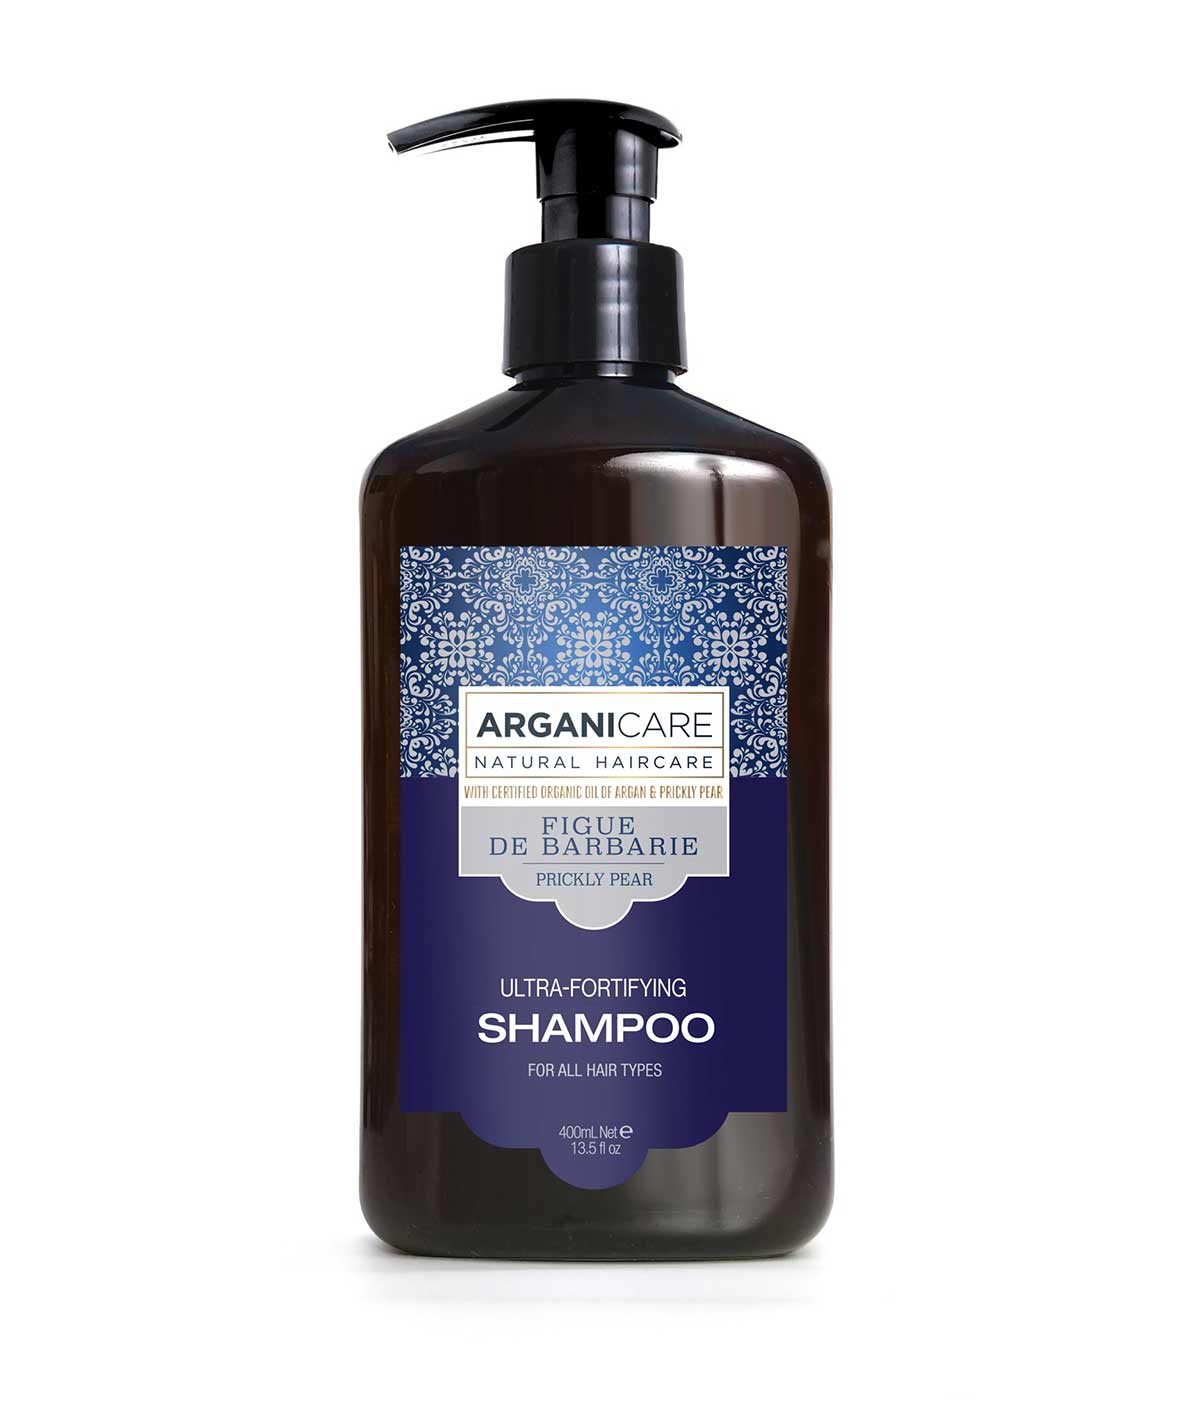 Arganicare - Prickly pear - "Ultra-fortifying" fortifying shampoo - 400 ml (Anti-waste Collection) - Arganicare - Ethni Beauty Market